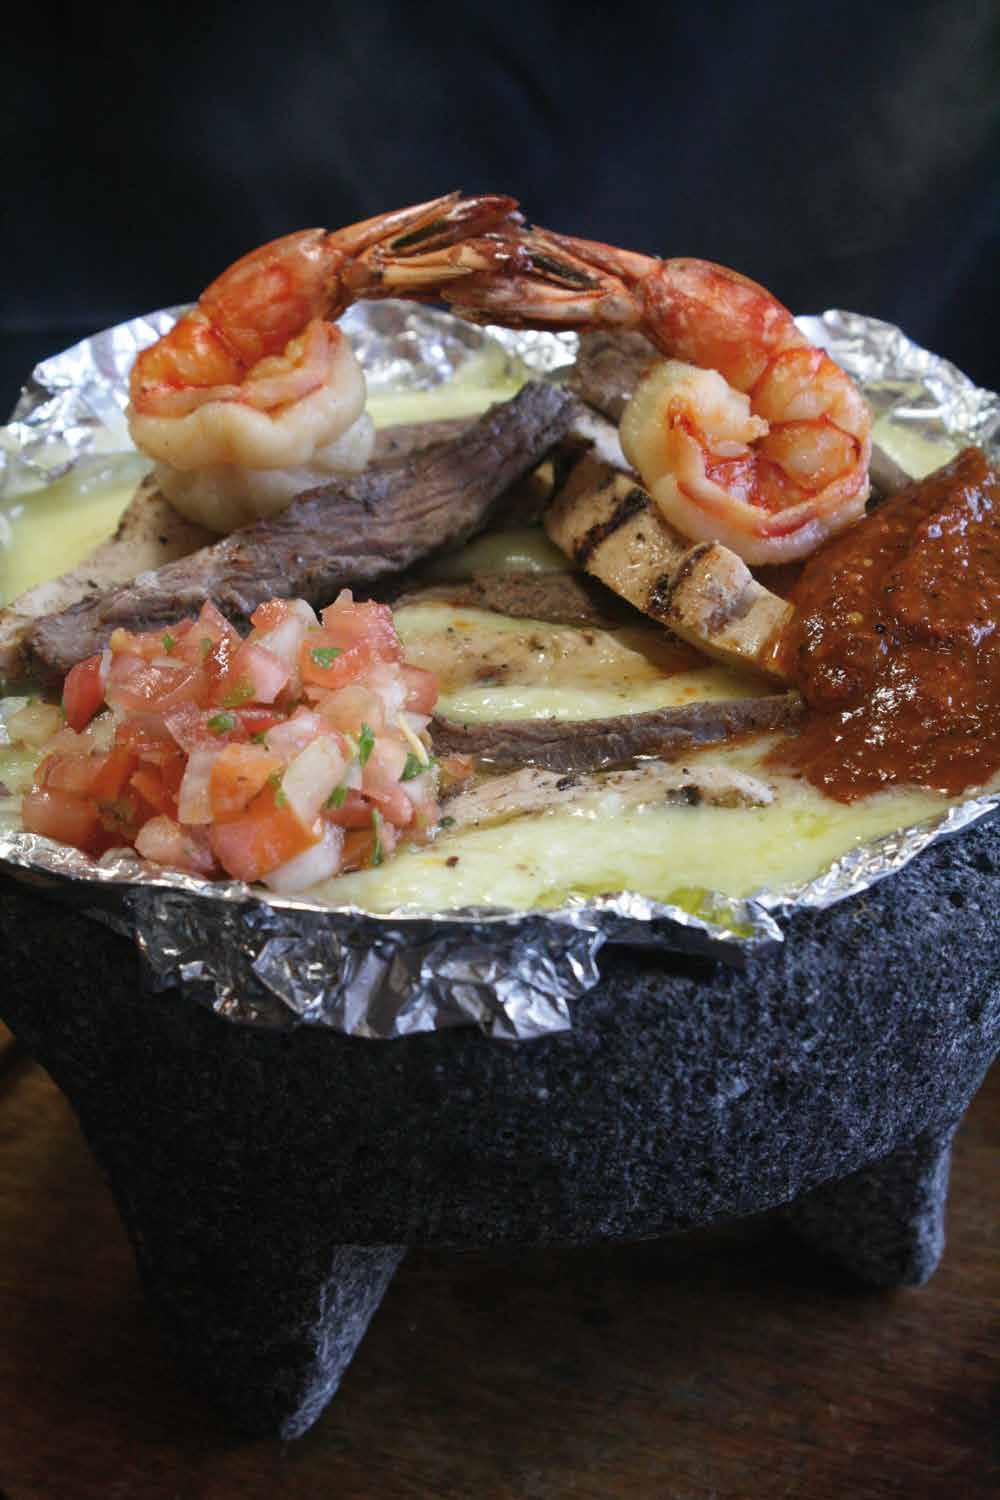 Molcajete OUR HOUSE SPECIALTY TACOS Here at Just Tacos Mexican Grill & Cantina each plate below comes with our specialty tortillas, spanish rice and refried beans for your